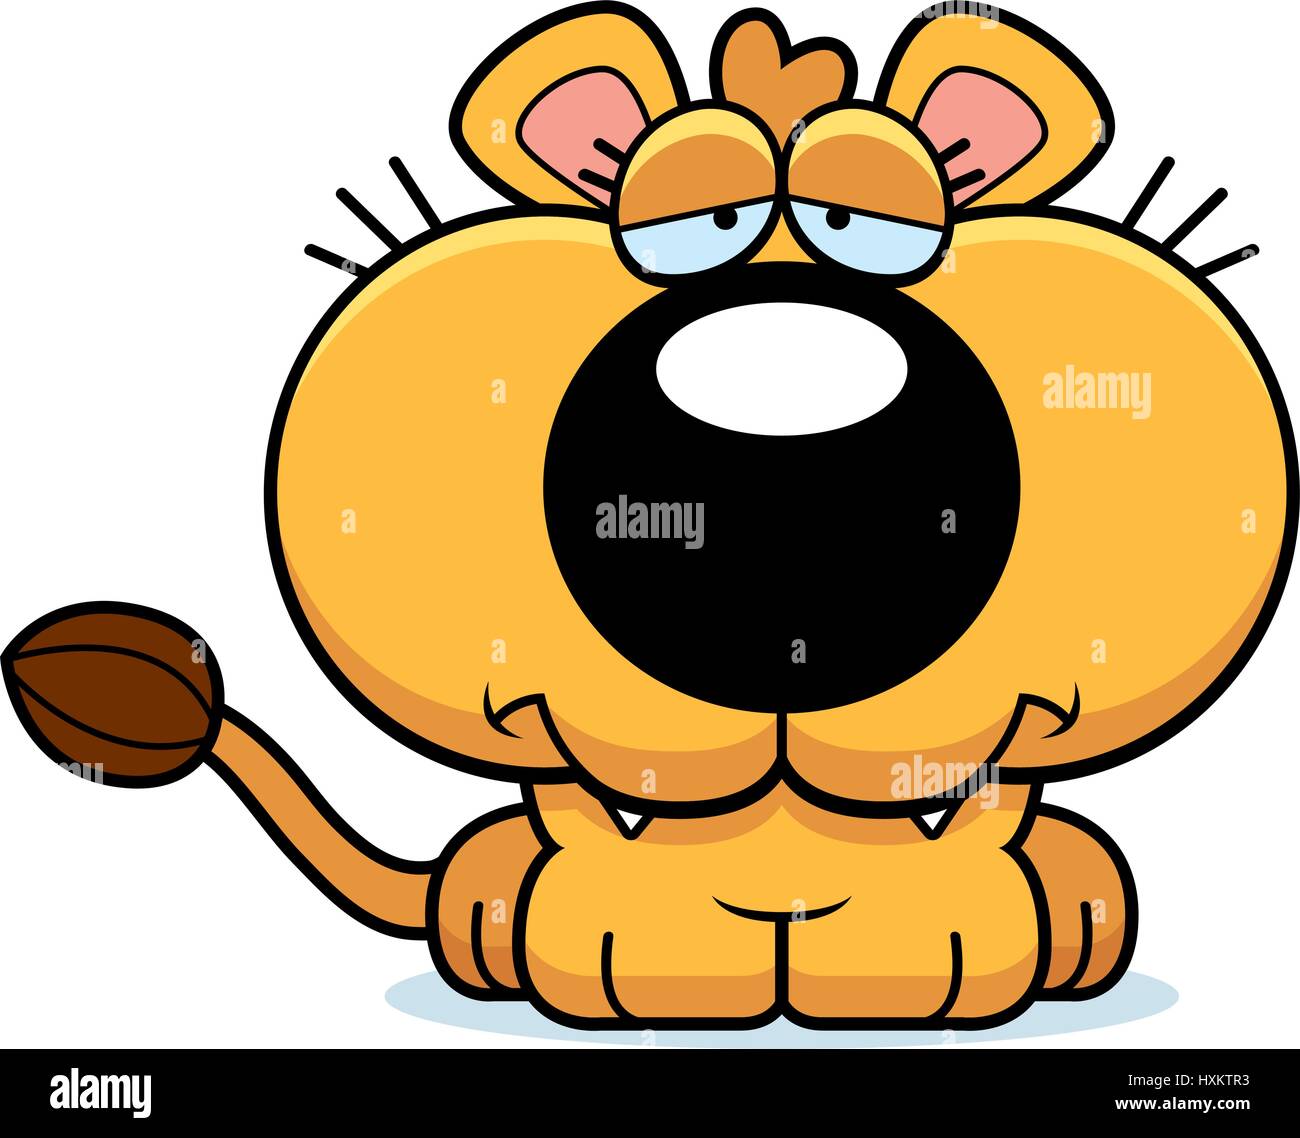 A cartoon illustration of a lioness cub with a sad expression. Stock Vector